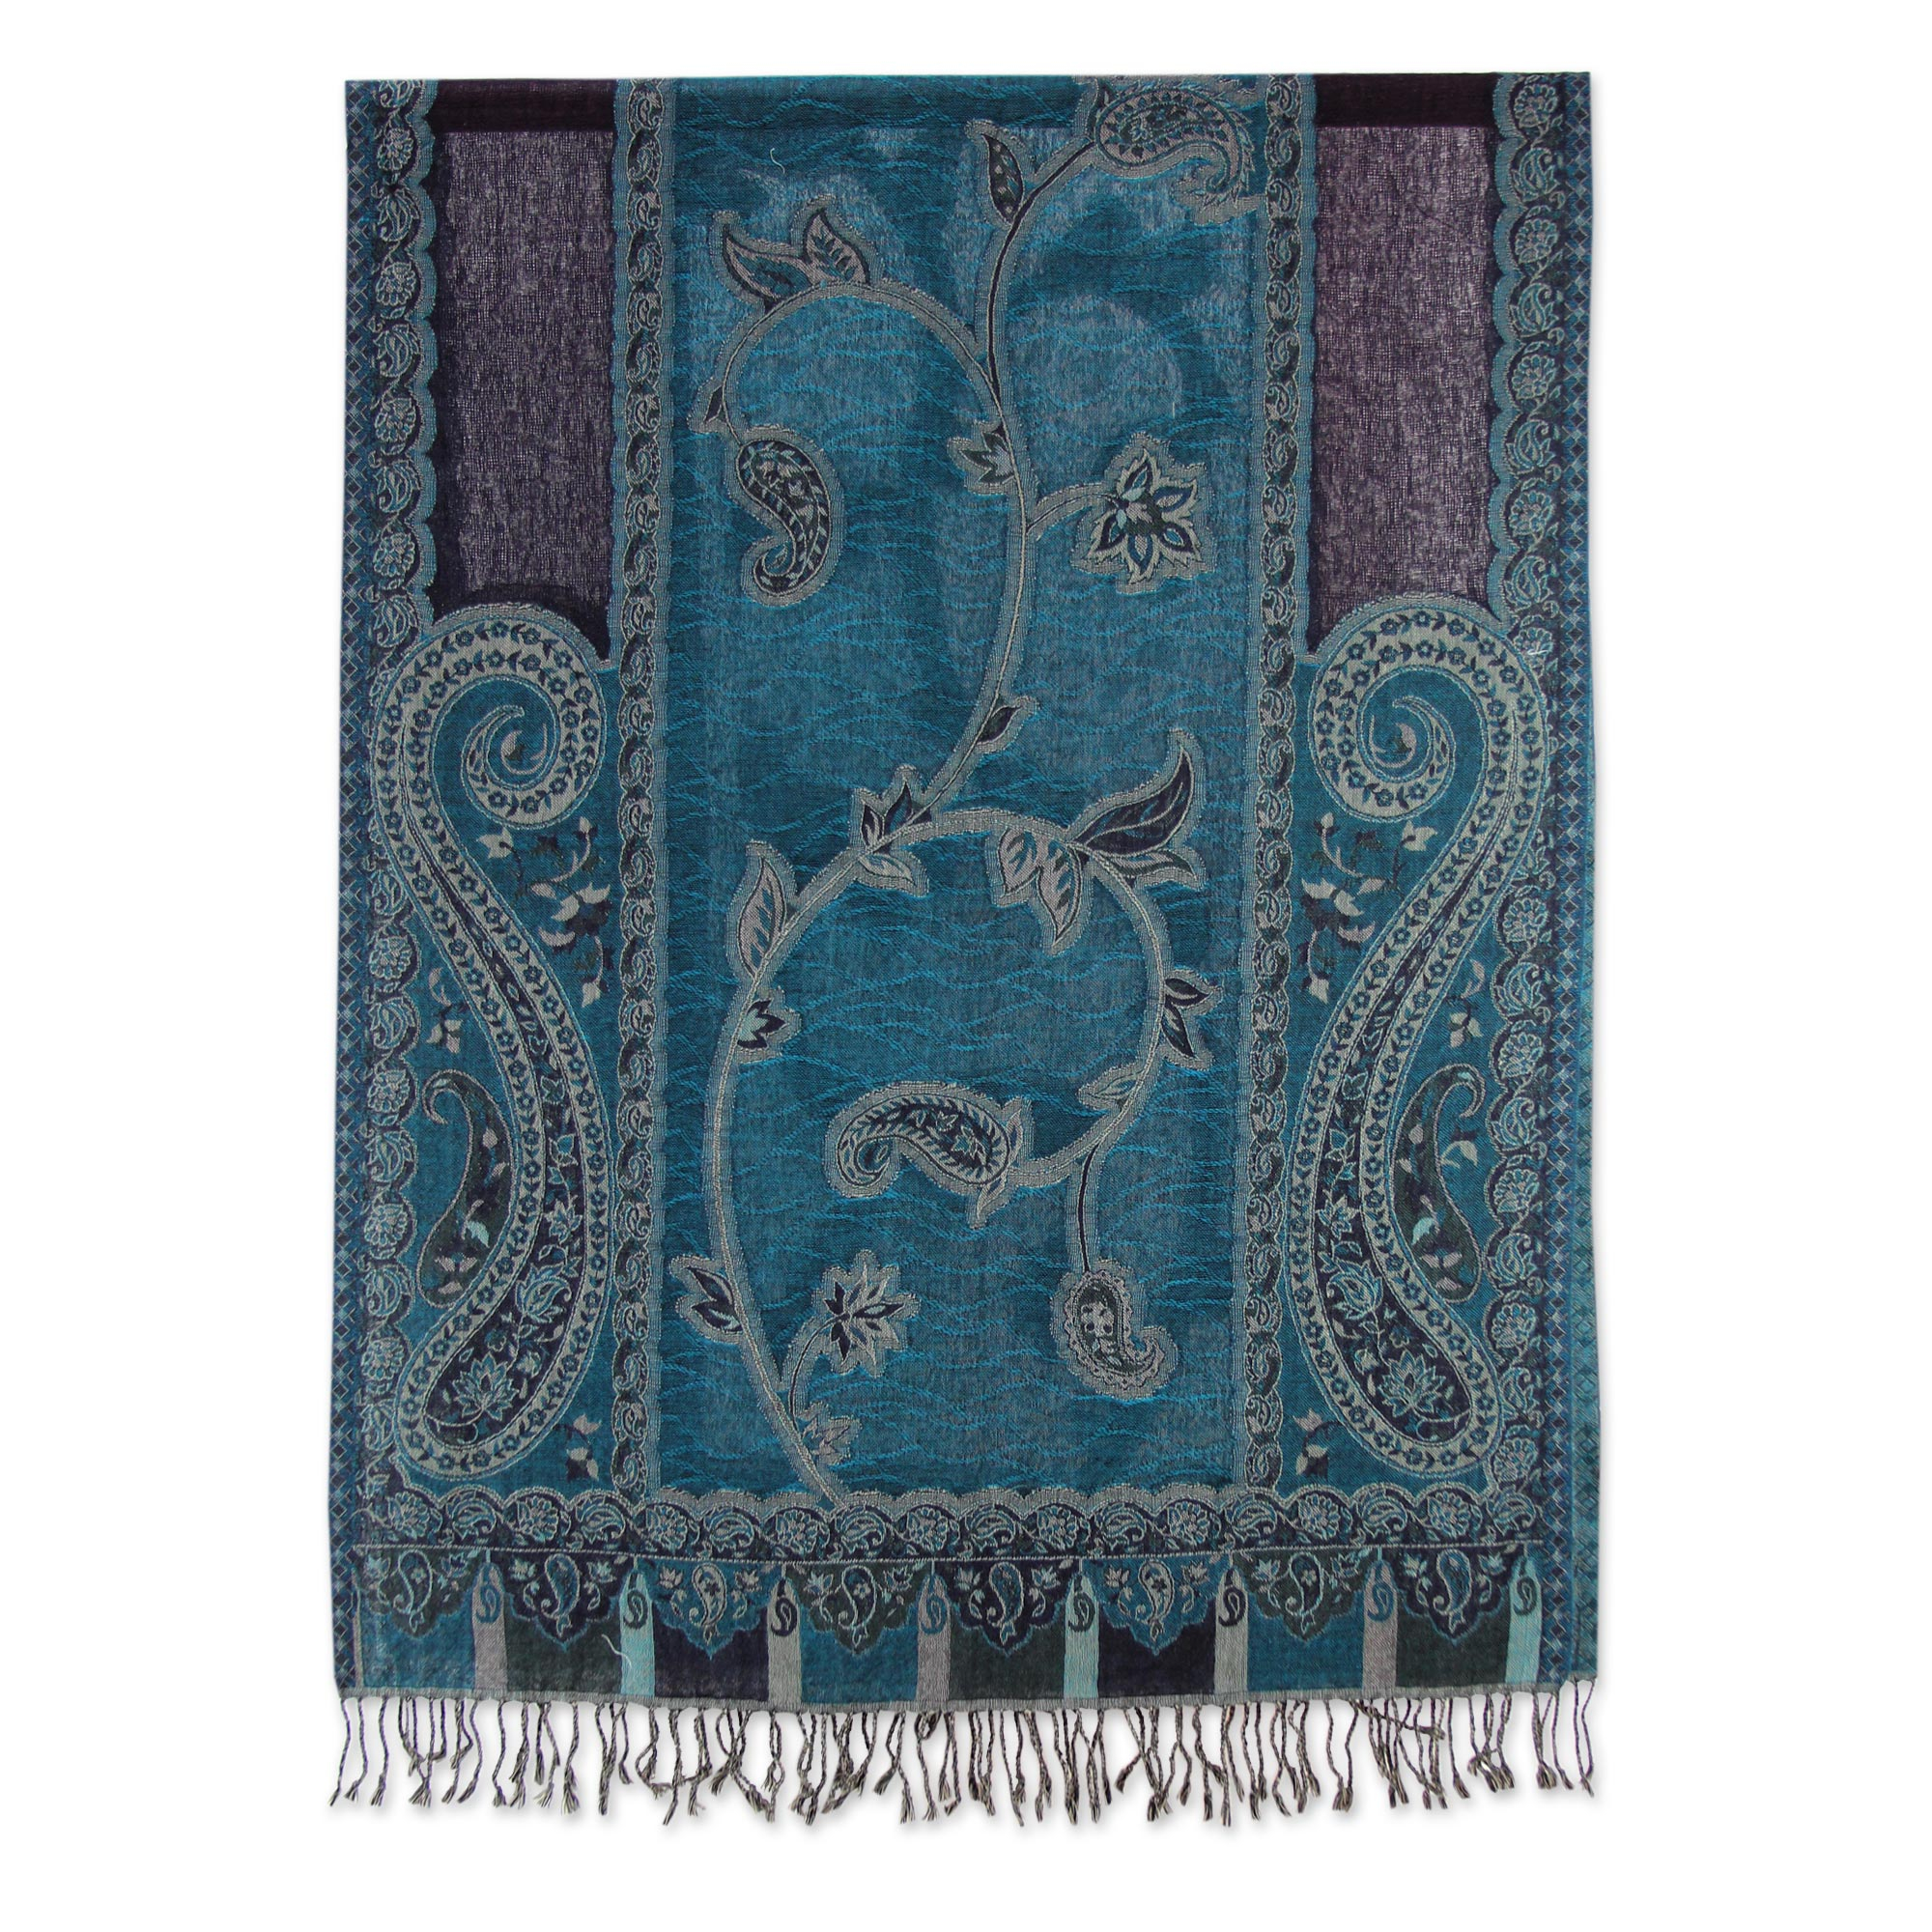 Indian Wool Shawl with Paisley and Floral Motif - Paisley Harmony | NOVICA